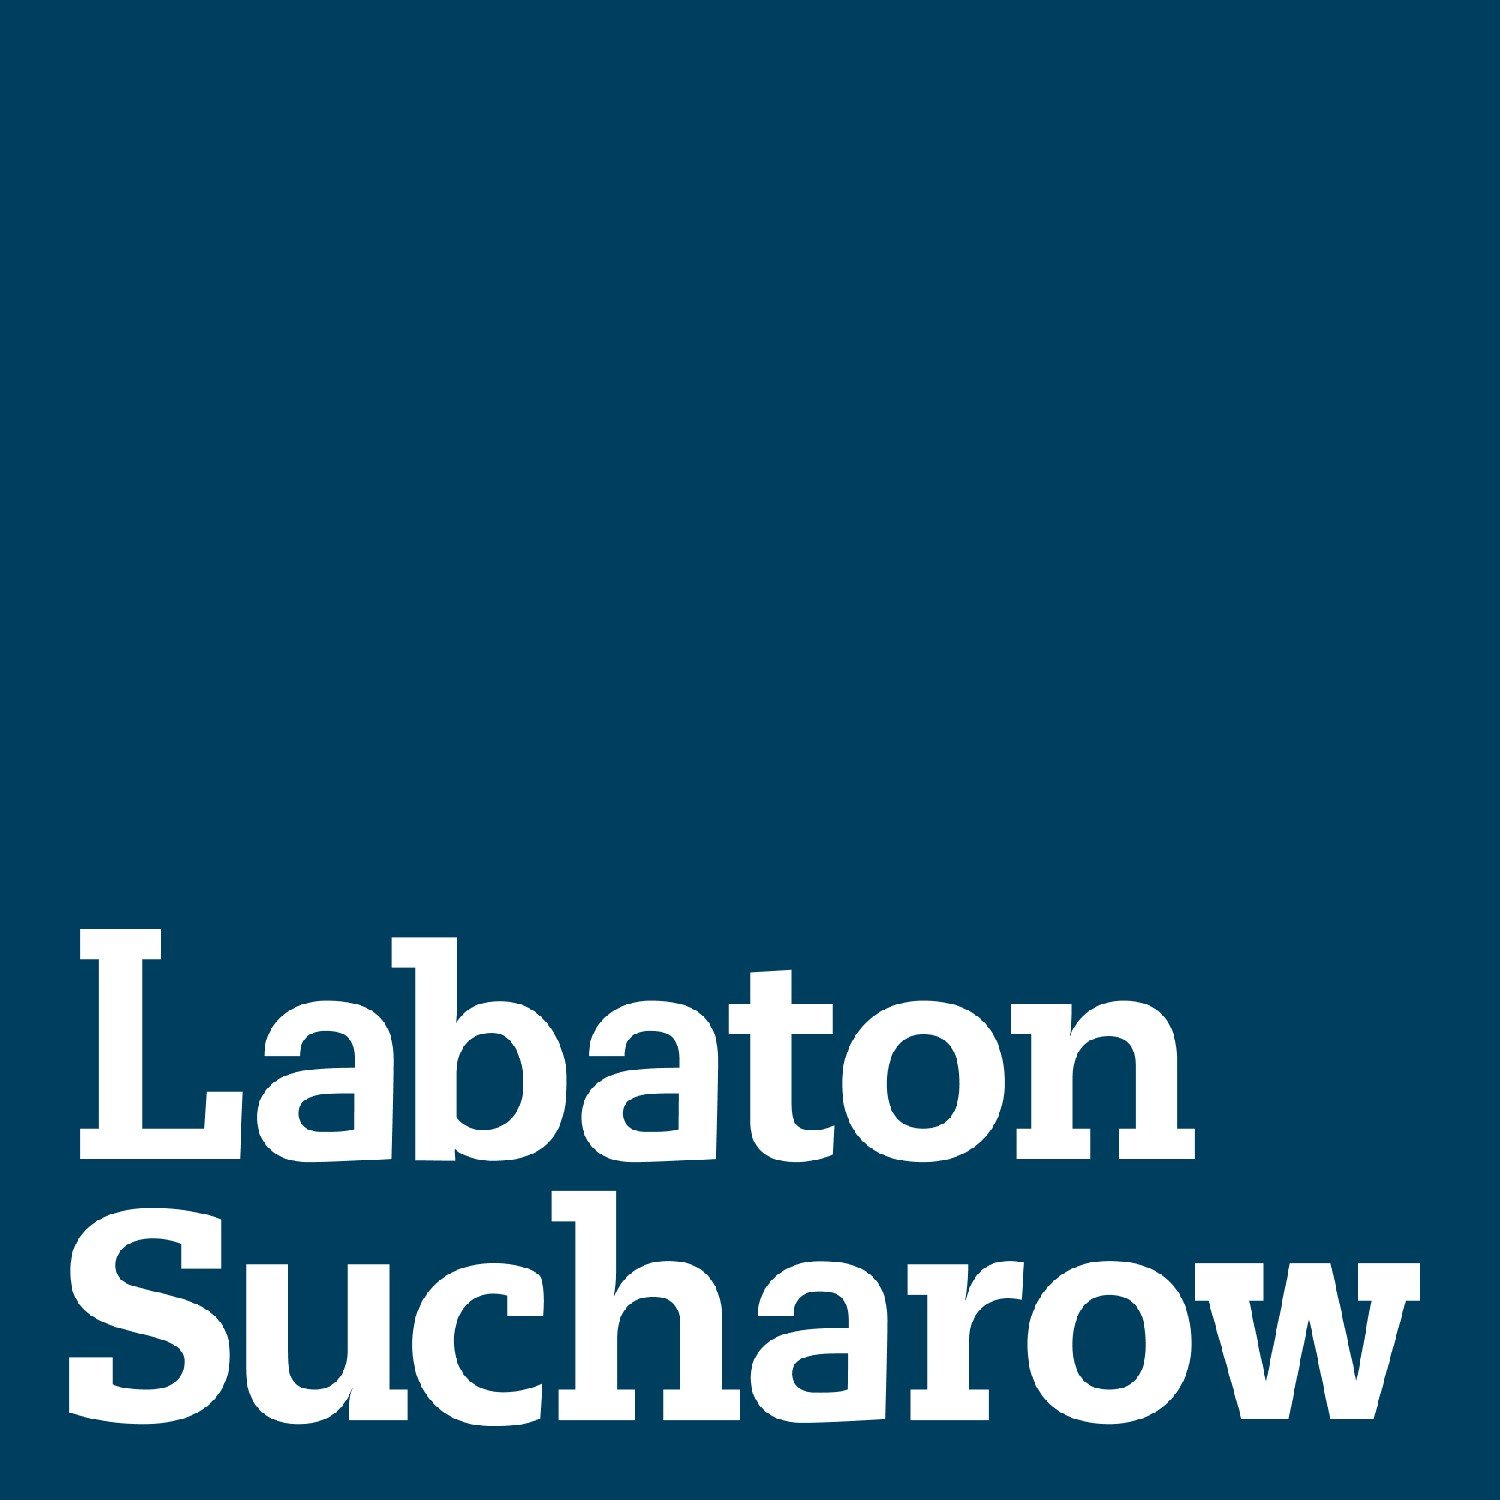 Labaton Sucharow LLP, Tuesday, June 8, 2021, Press release picture